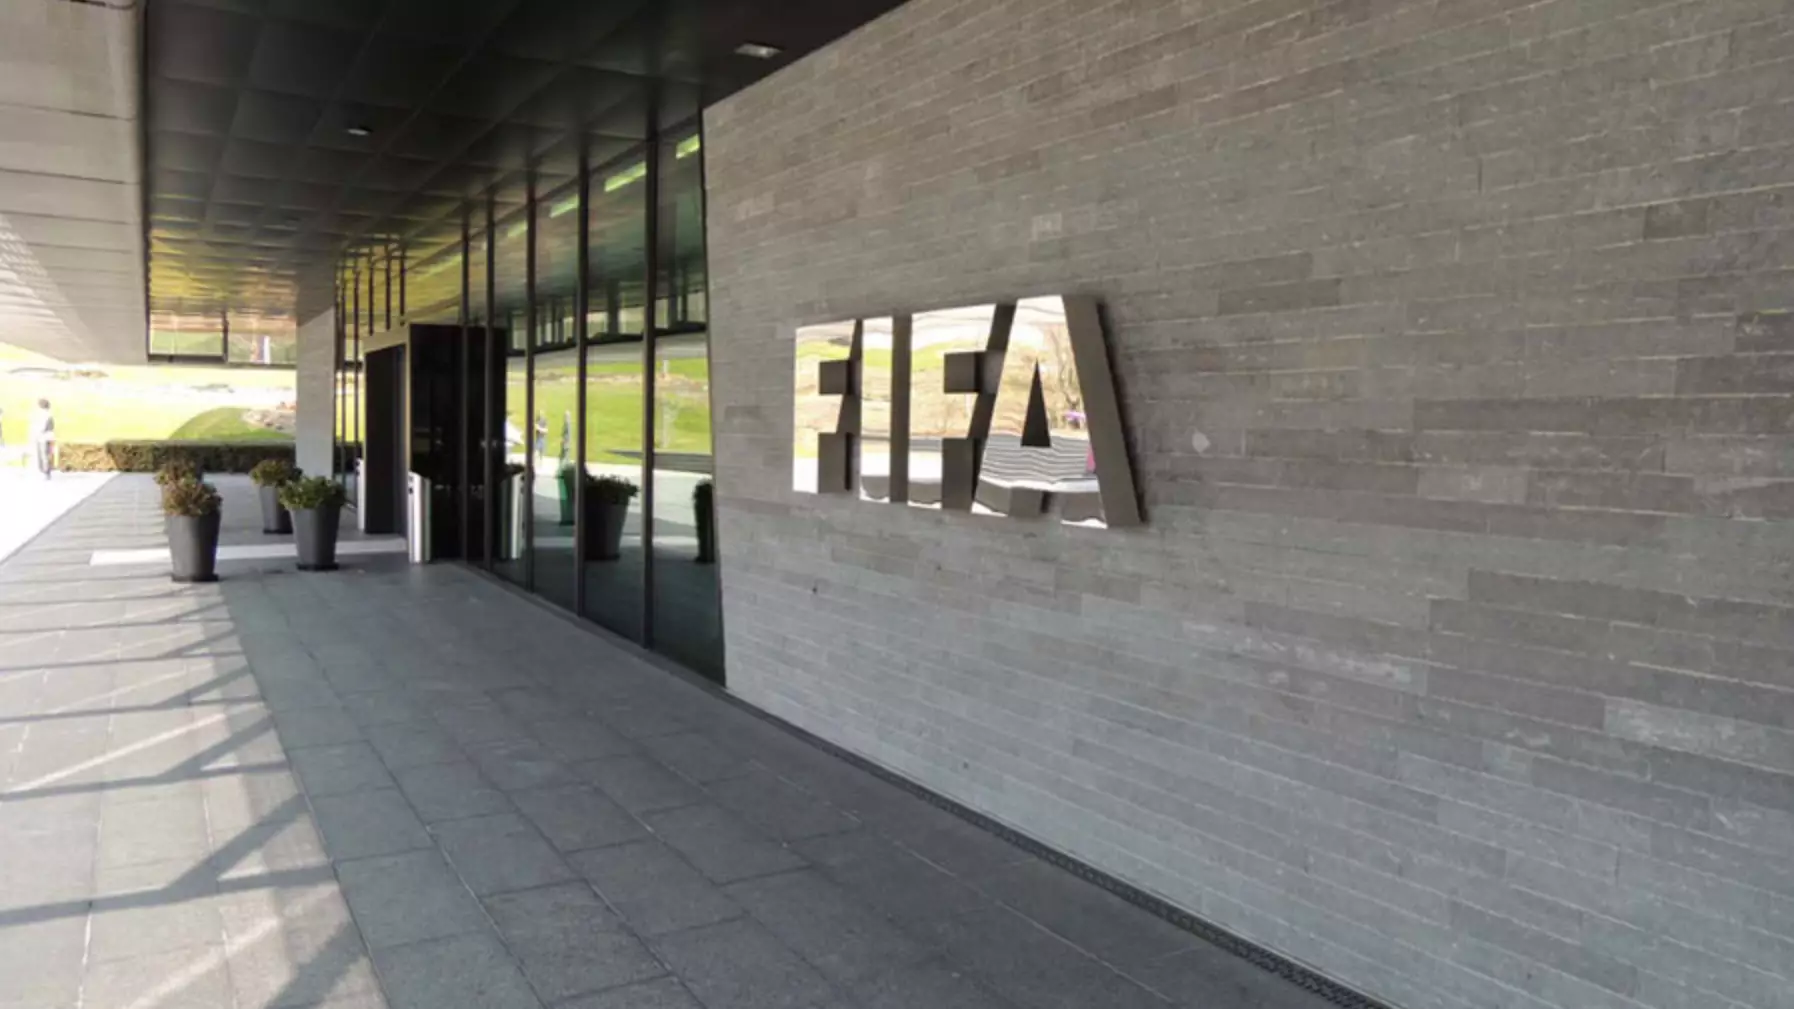 Two Winners Of The FIFA Awards Have Been 'Leaked'